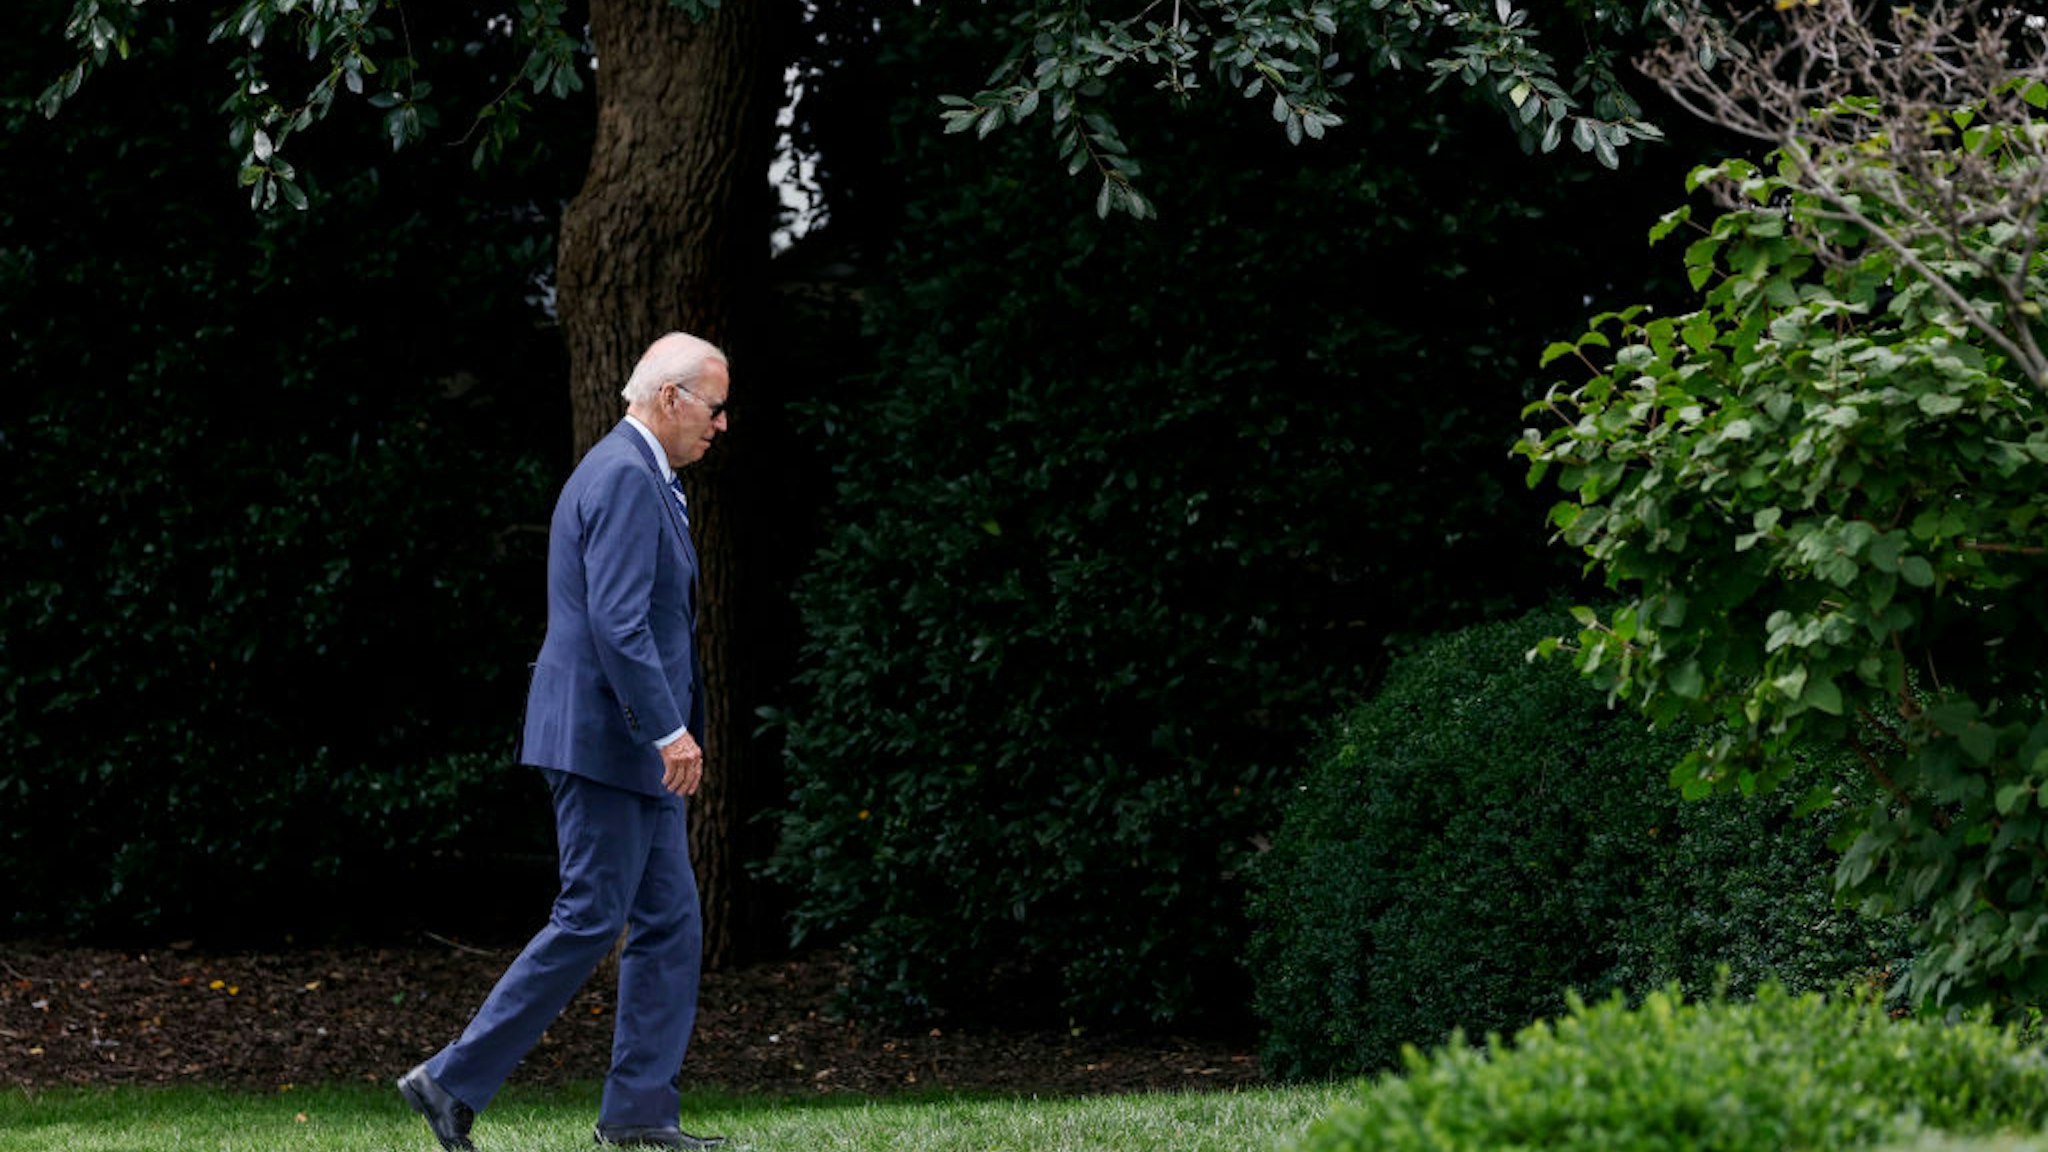 WASHINGTON, DC - AUGUST 14: U.S. President Joe Biden walks to the Oval Office after returning to the White House grounds on Marine One on August 14, 2023 in Washington, DC. Biden spent the weekend at his vacation home in Rehoboth Beach, Delaware. (Photo by Anna Moneymaker/Getty Images)